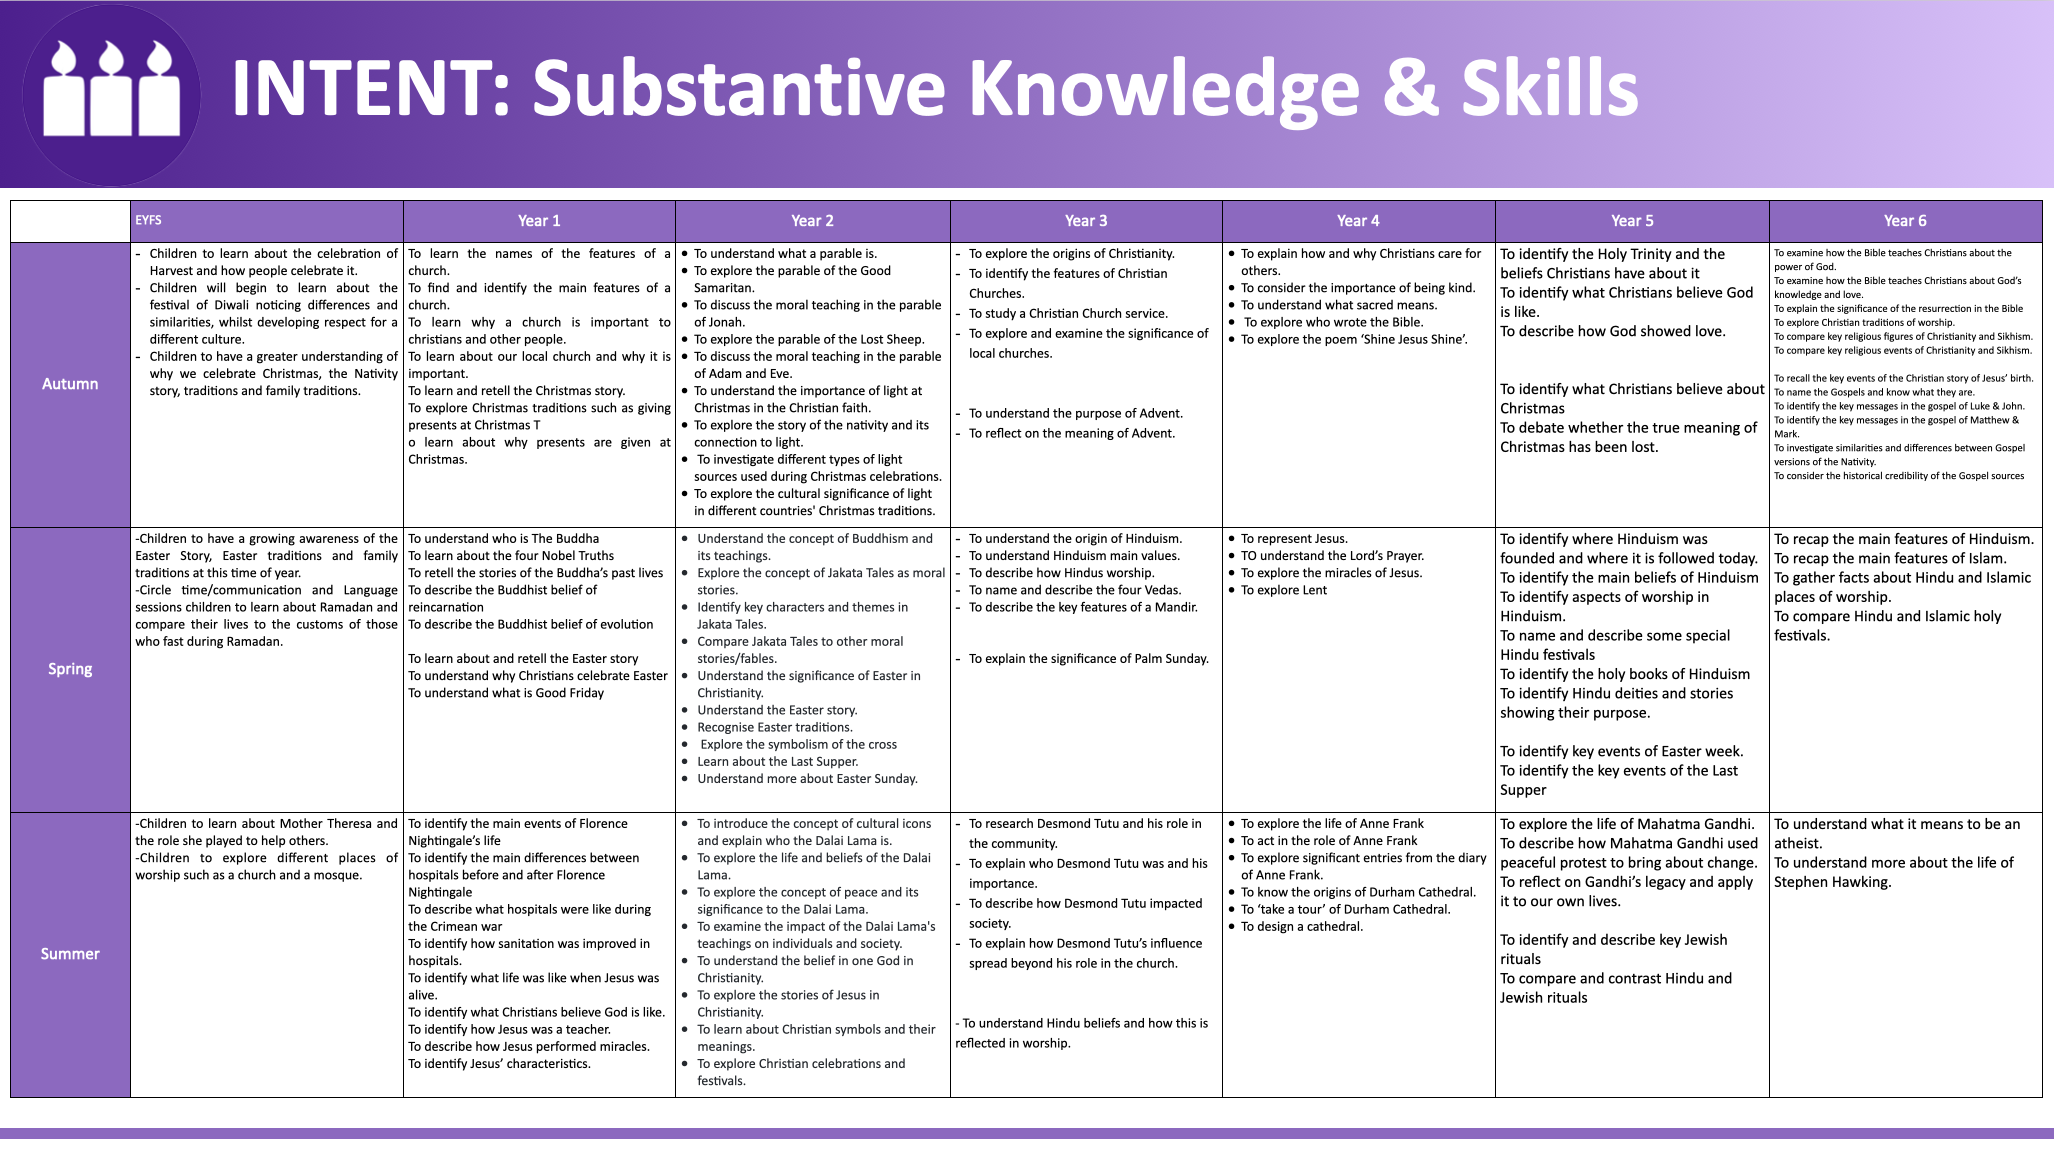 Substantive Knowledge and Skills